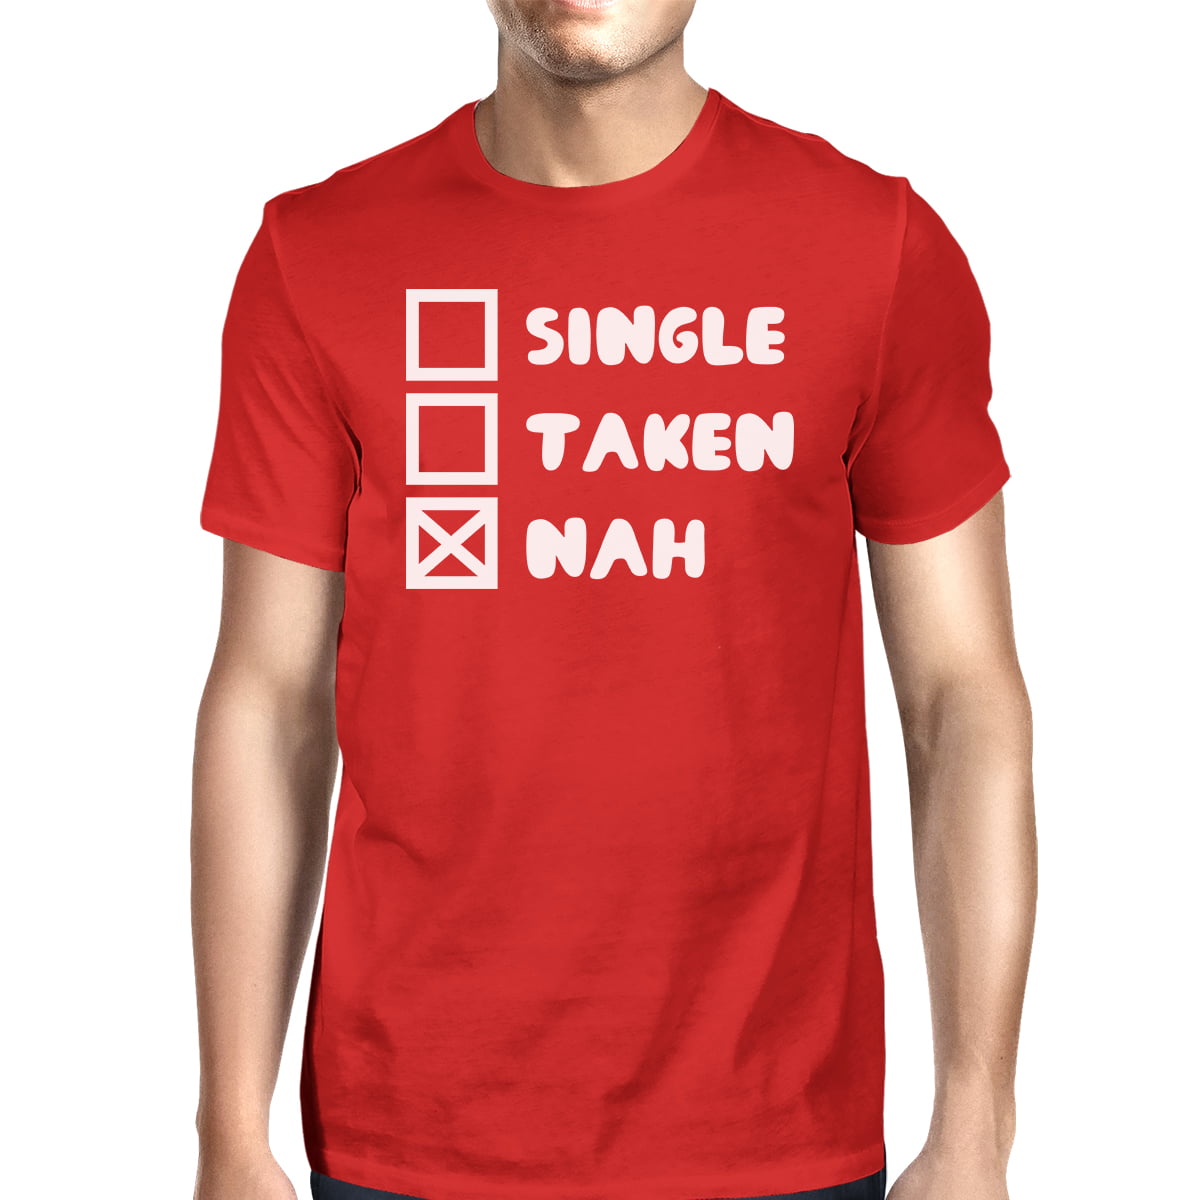 Details about   Single Taken Nah Mens Red T-shirt Humorous Graphic Light-Weight Tee 